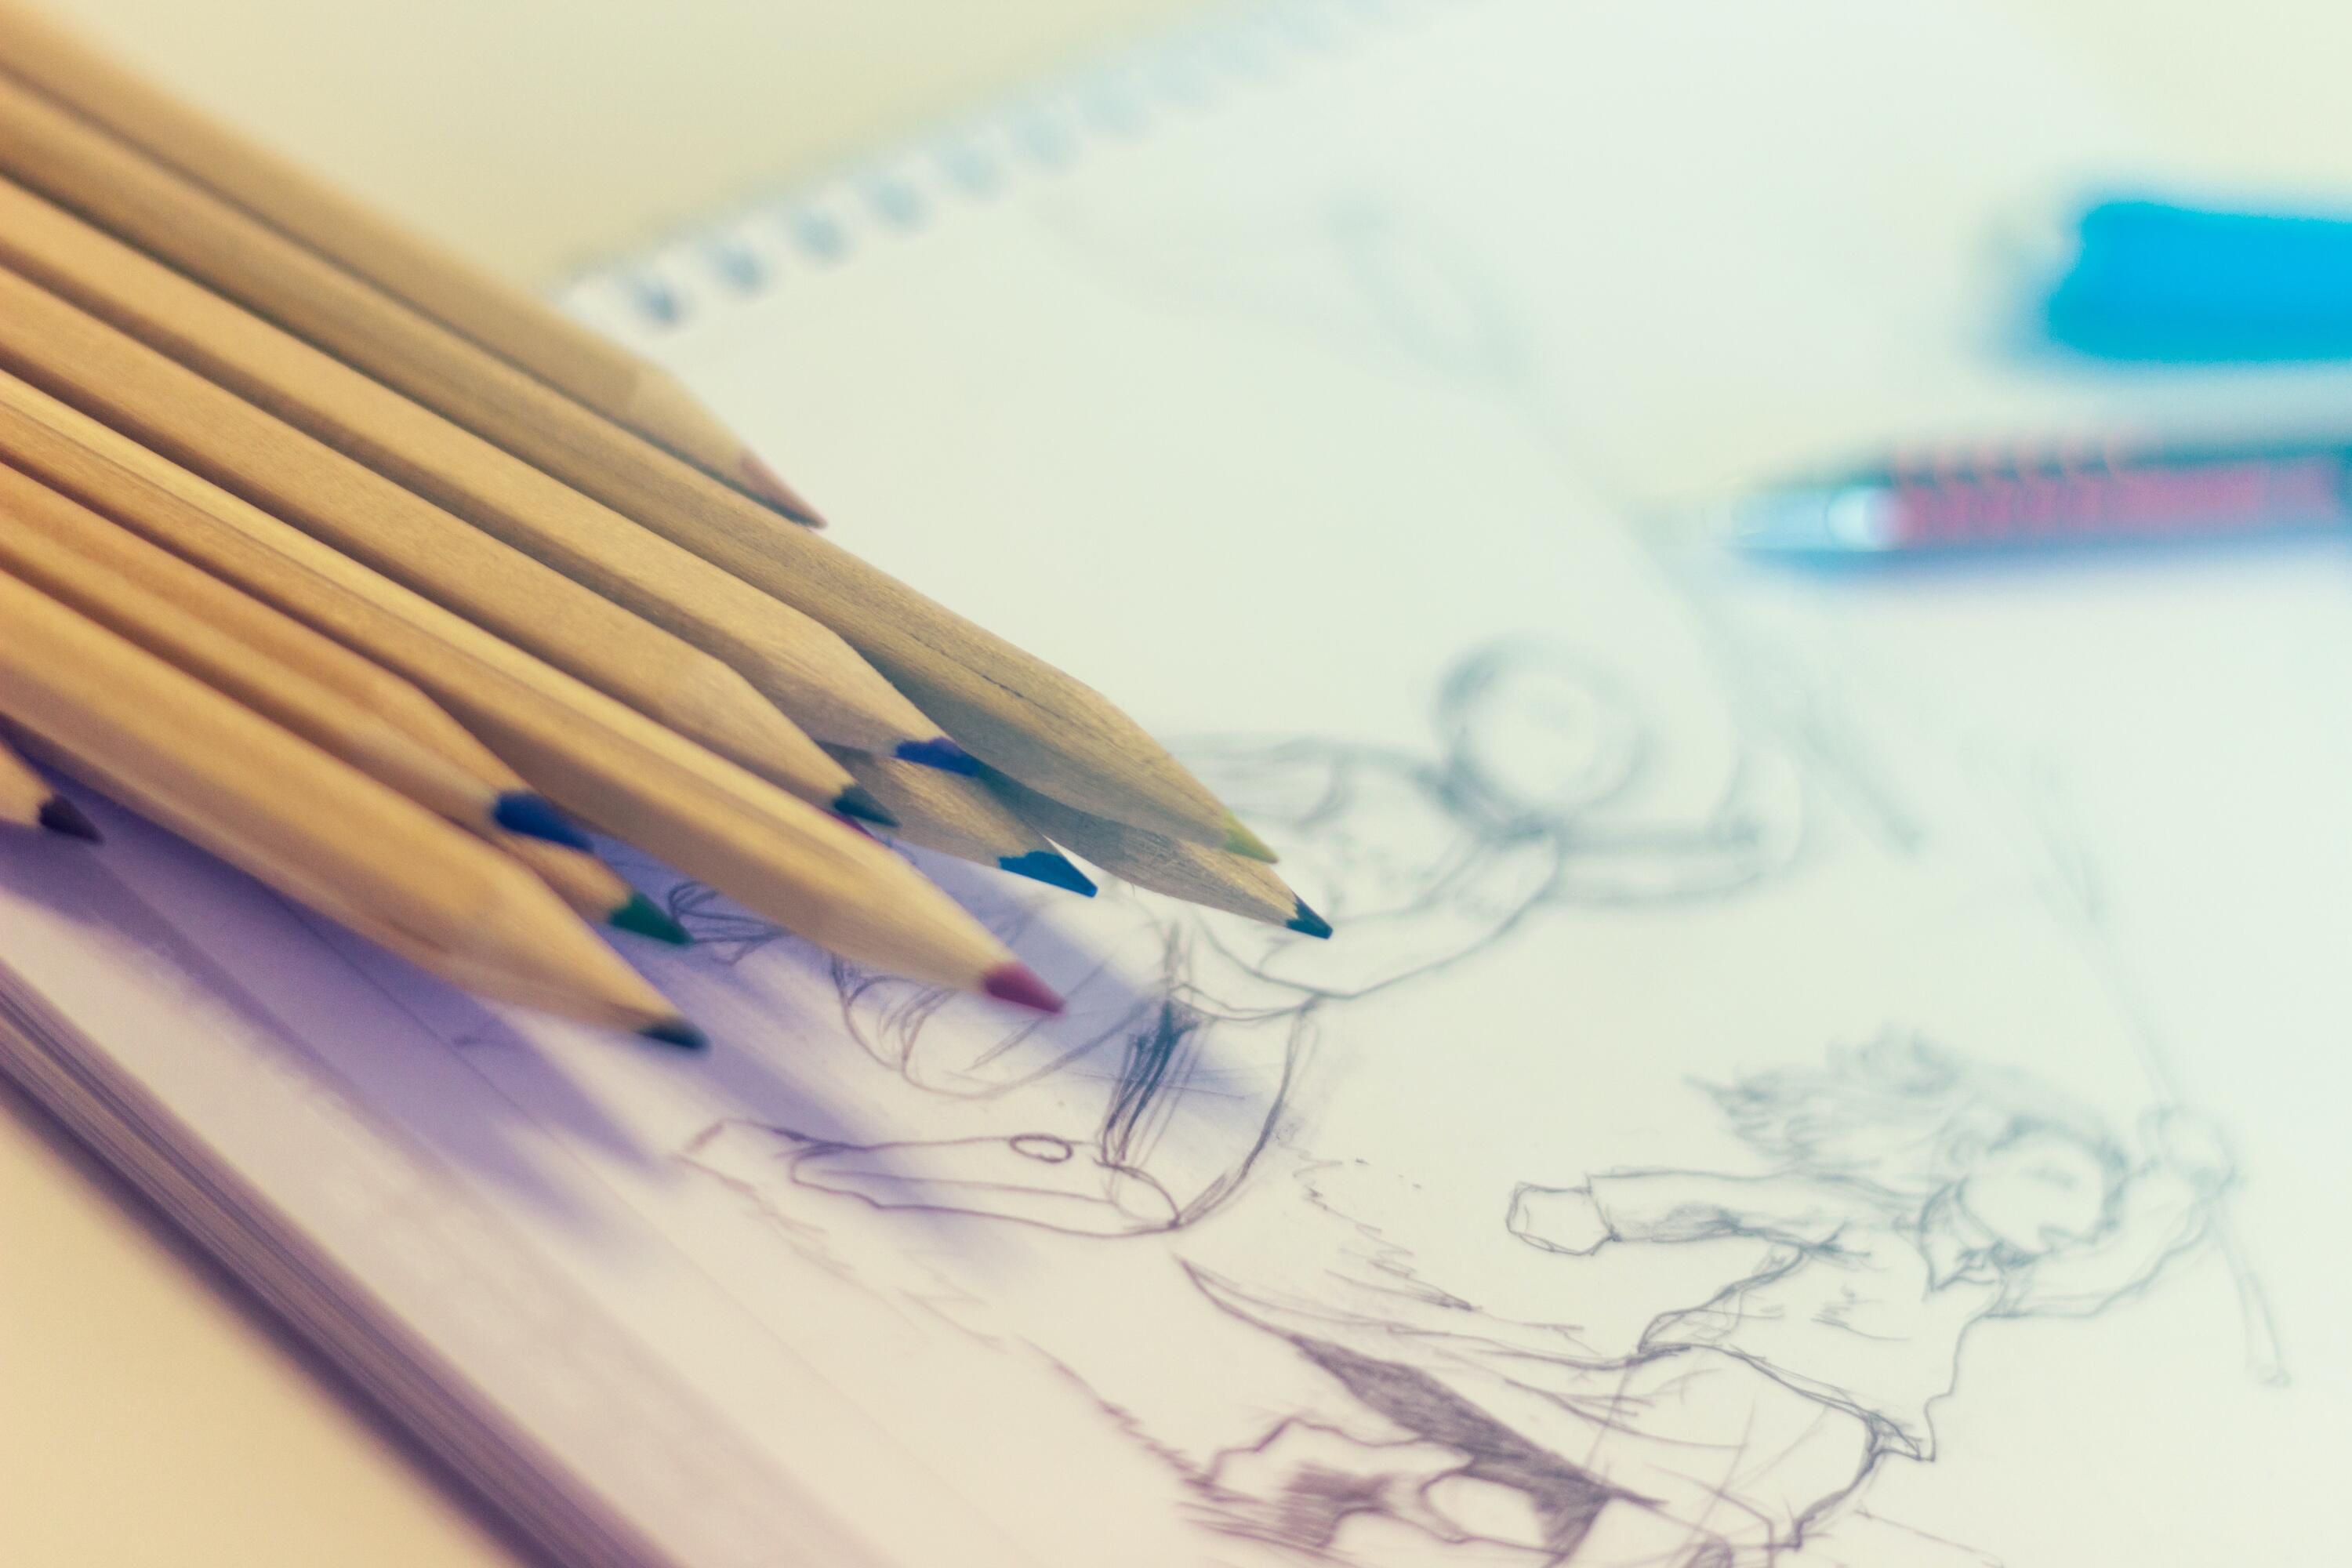 Close up image of pencils and artwork